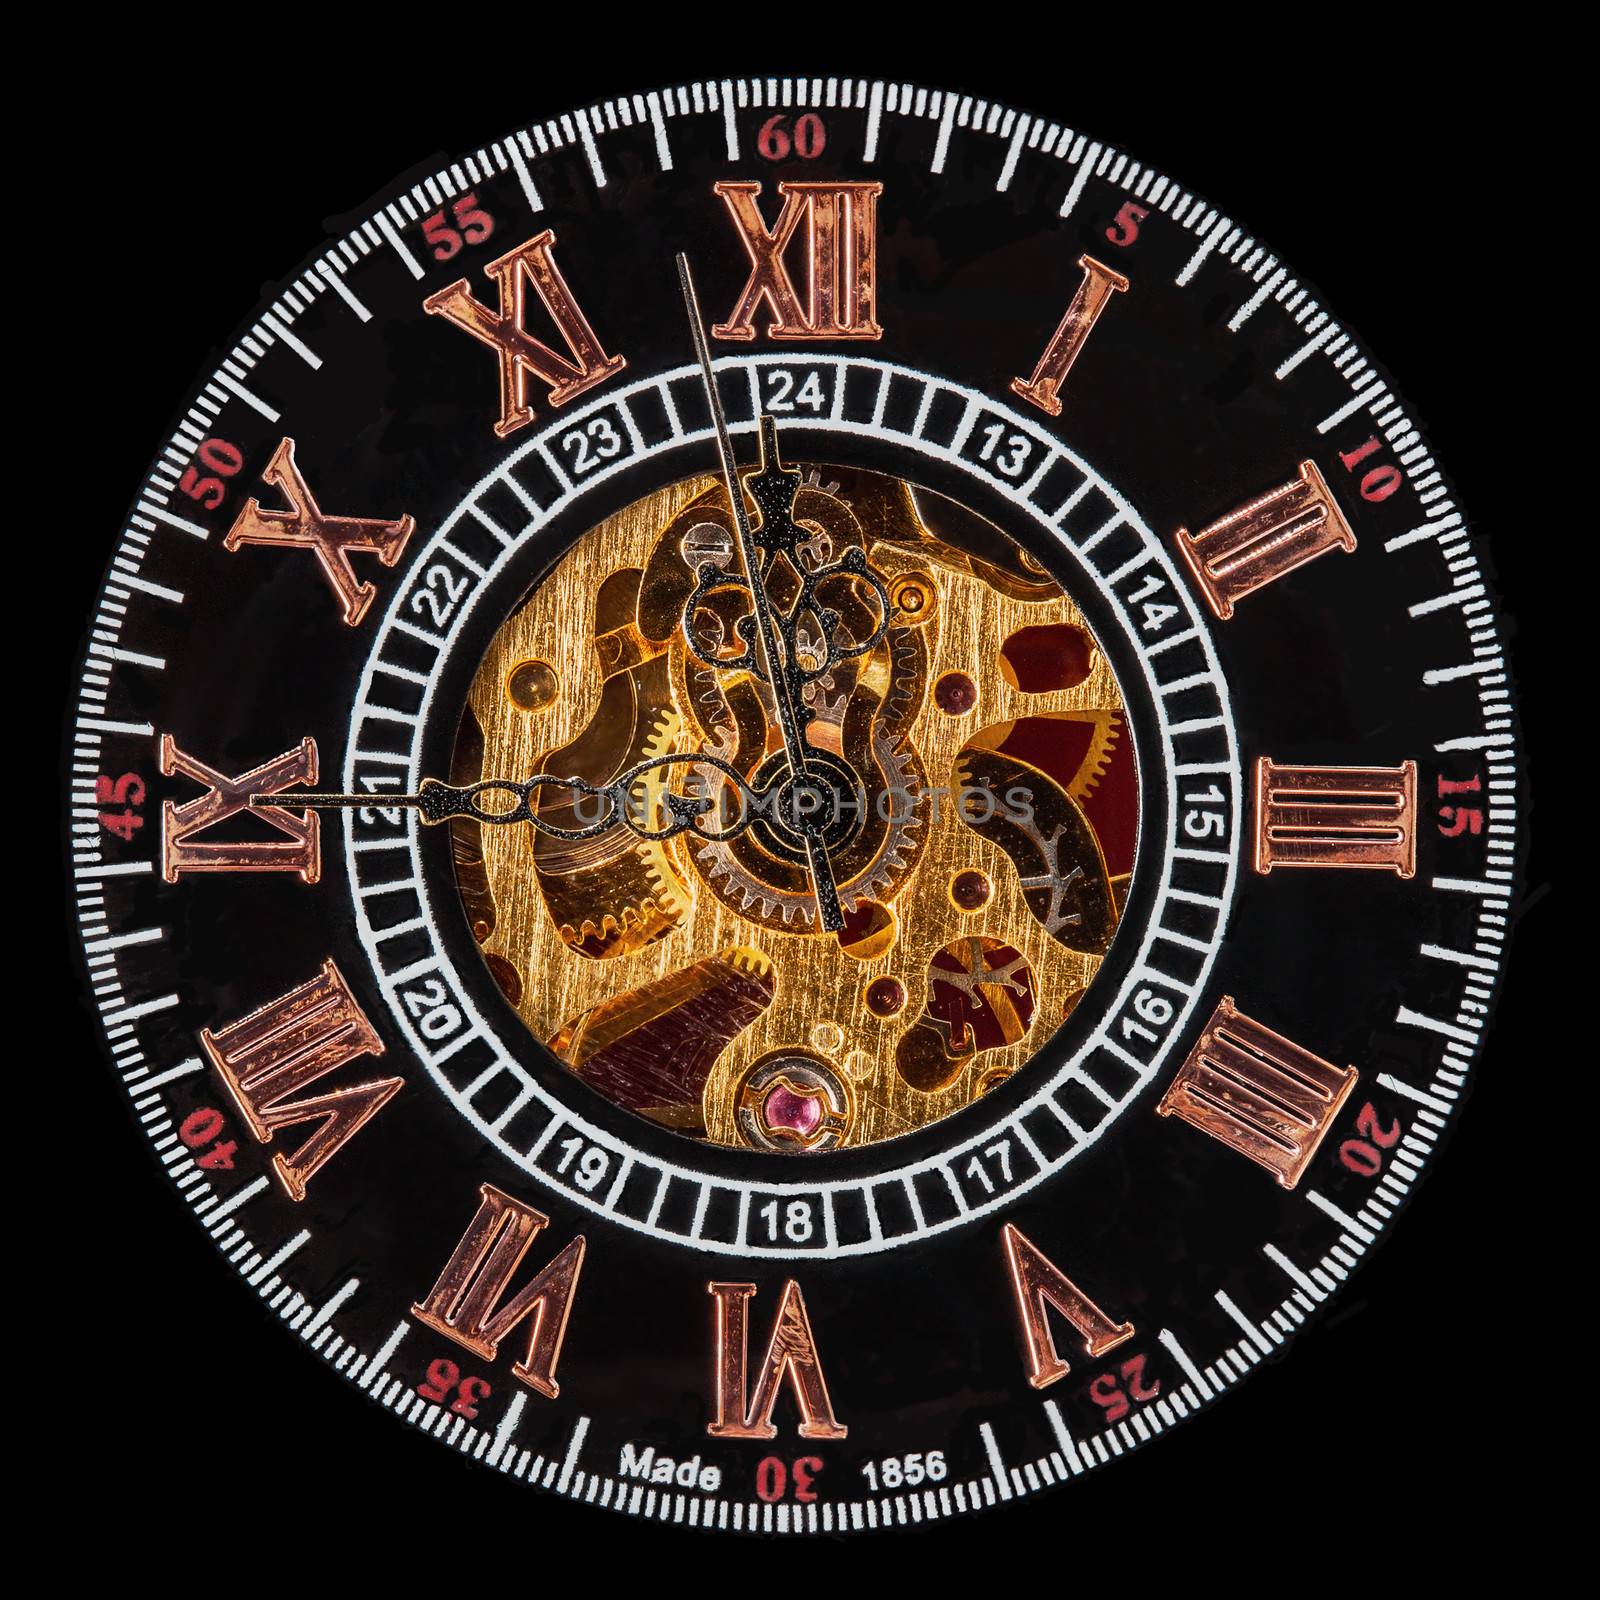 Macro shot of the face of an old pocket watch with a hand-wound mechanical movement. Clock shows hands approaching midnight